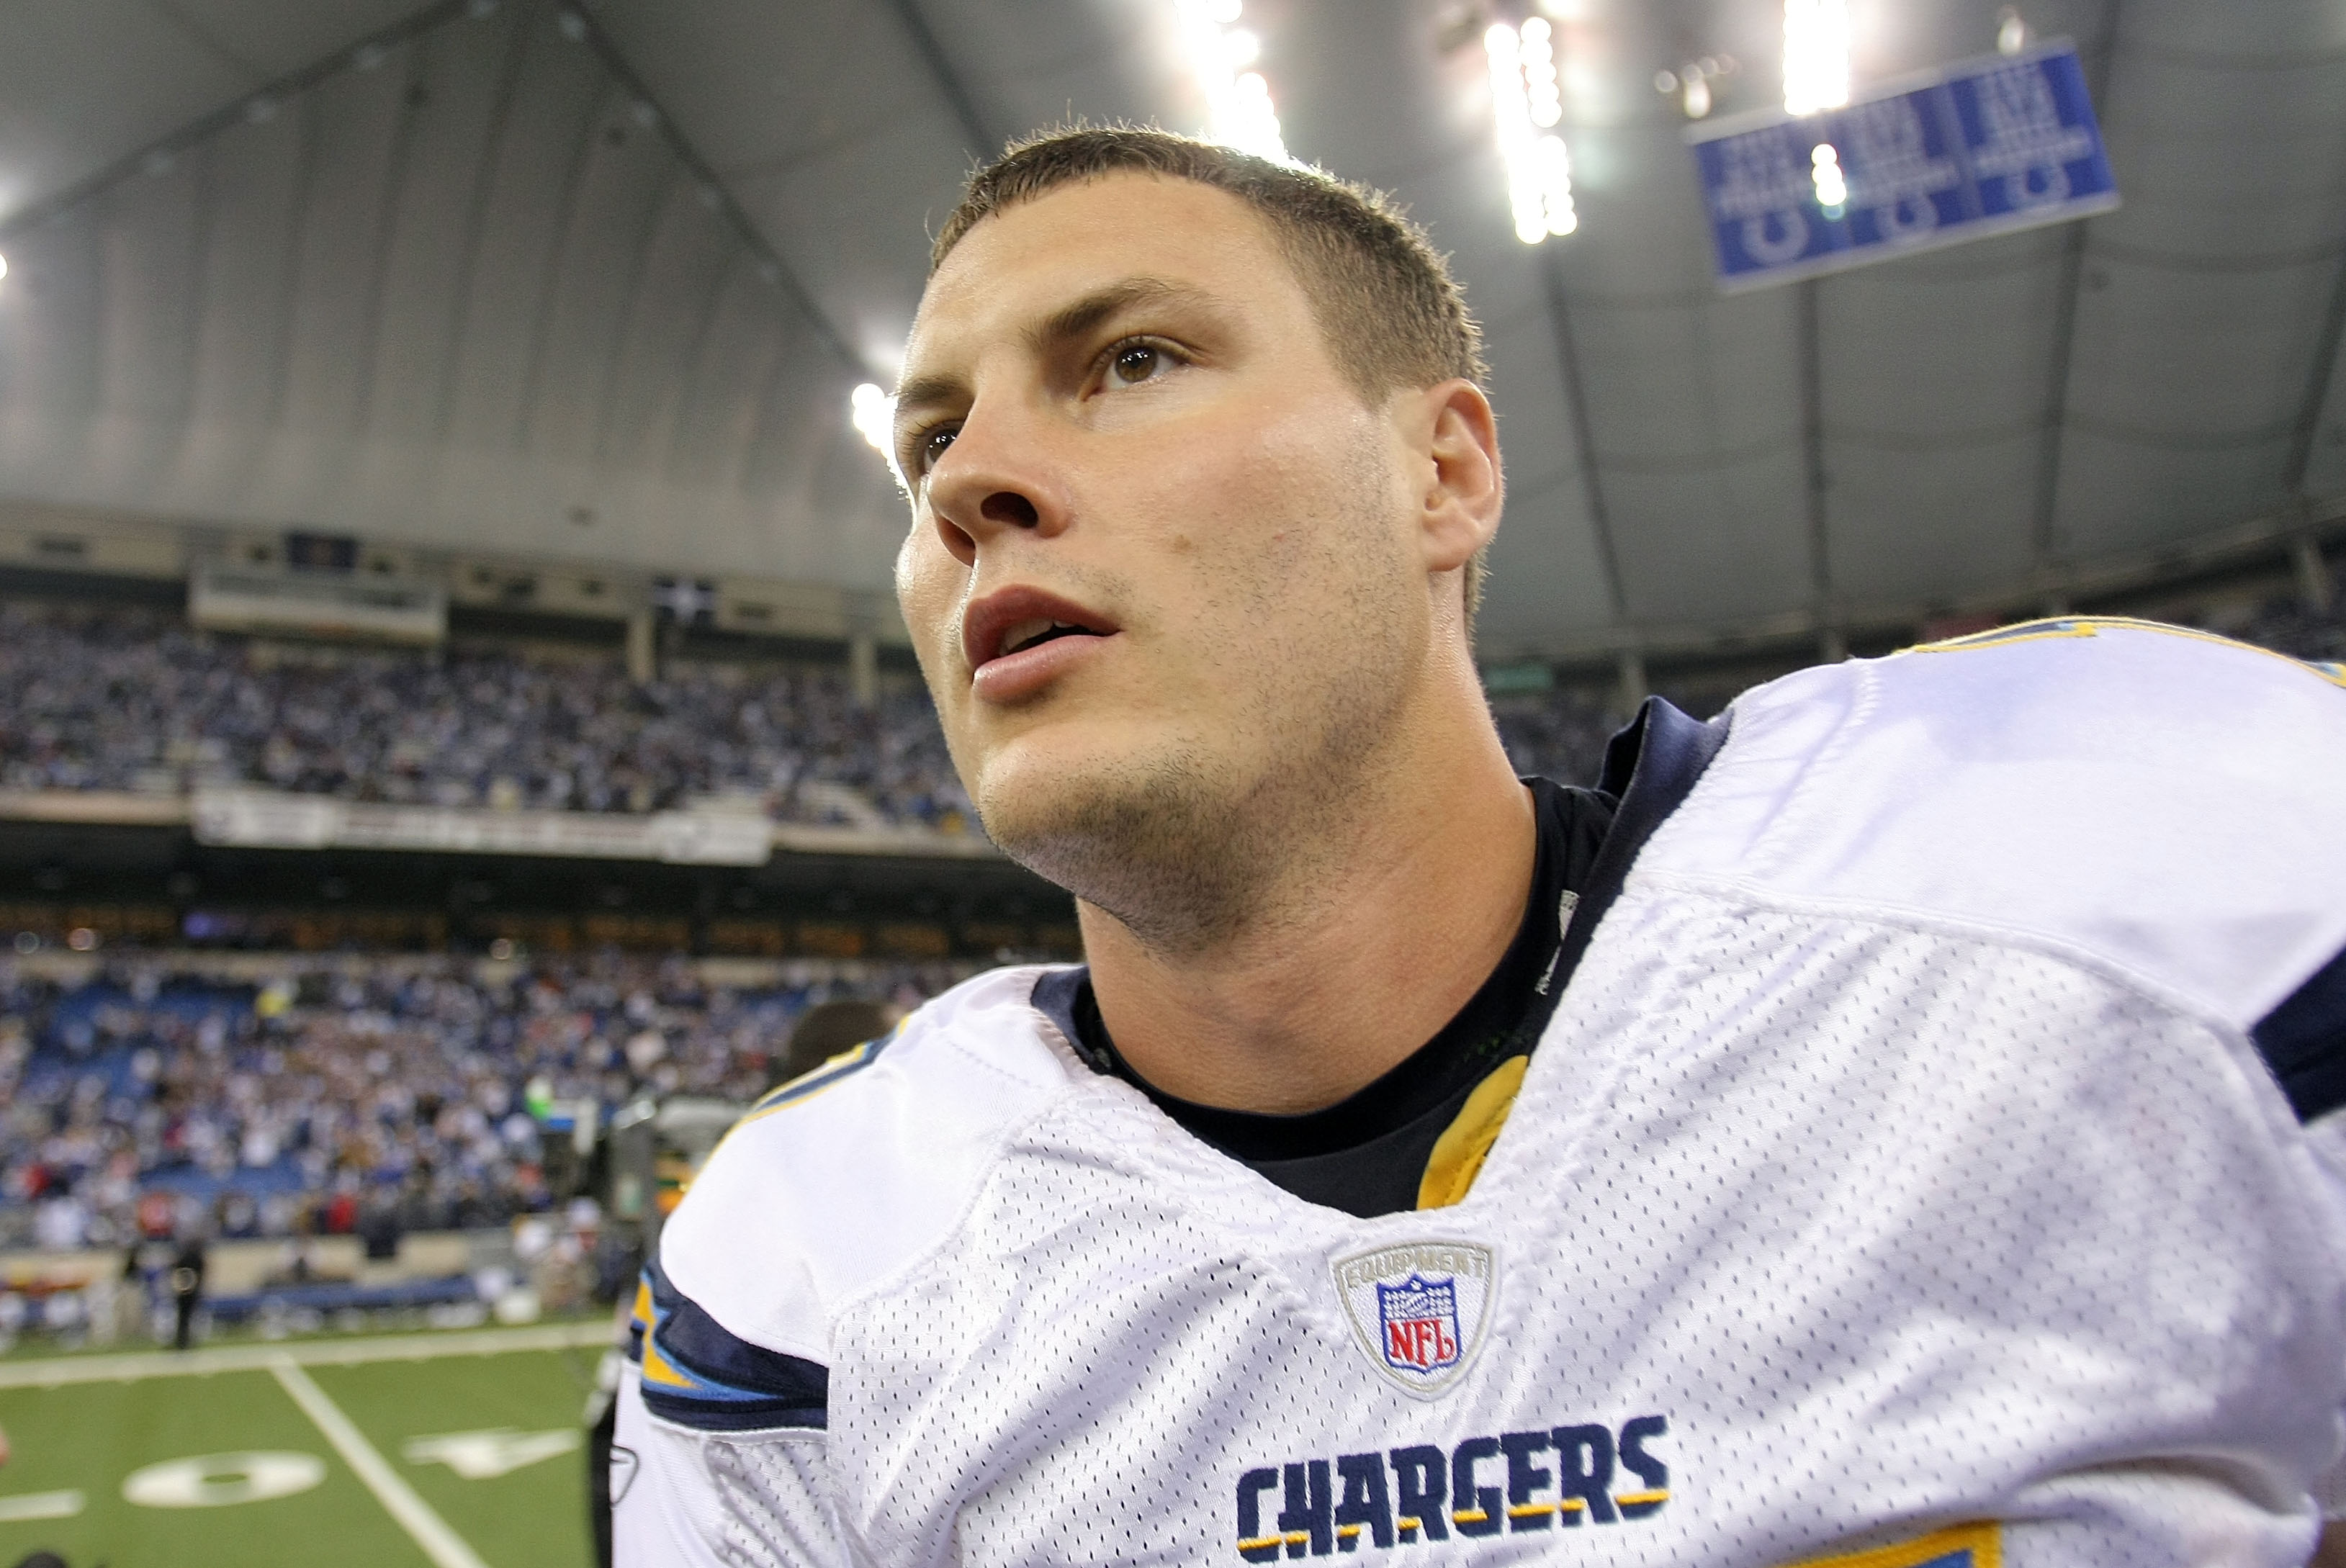 NFL player Philip Rivers